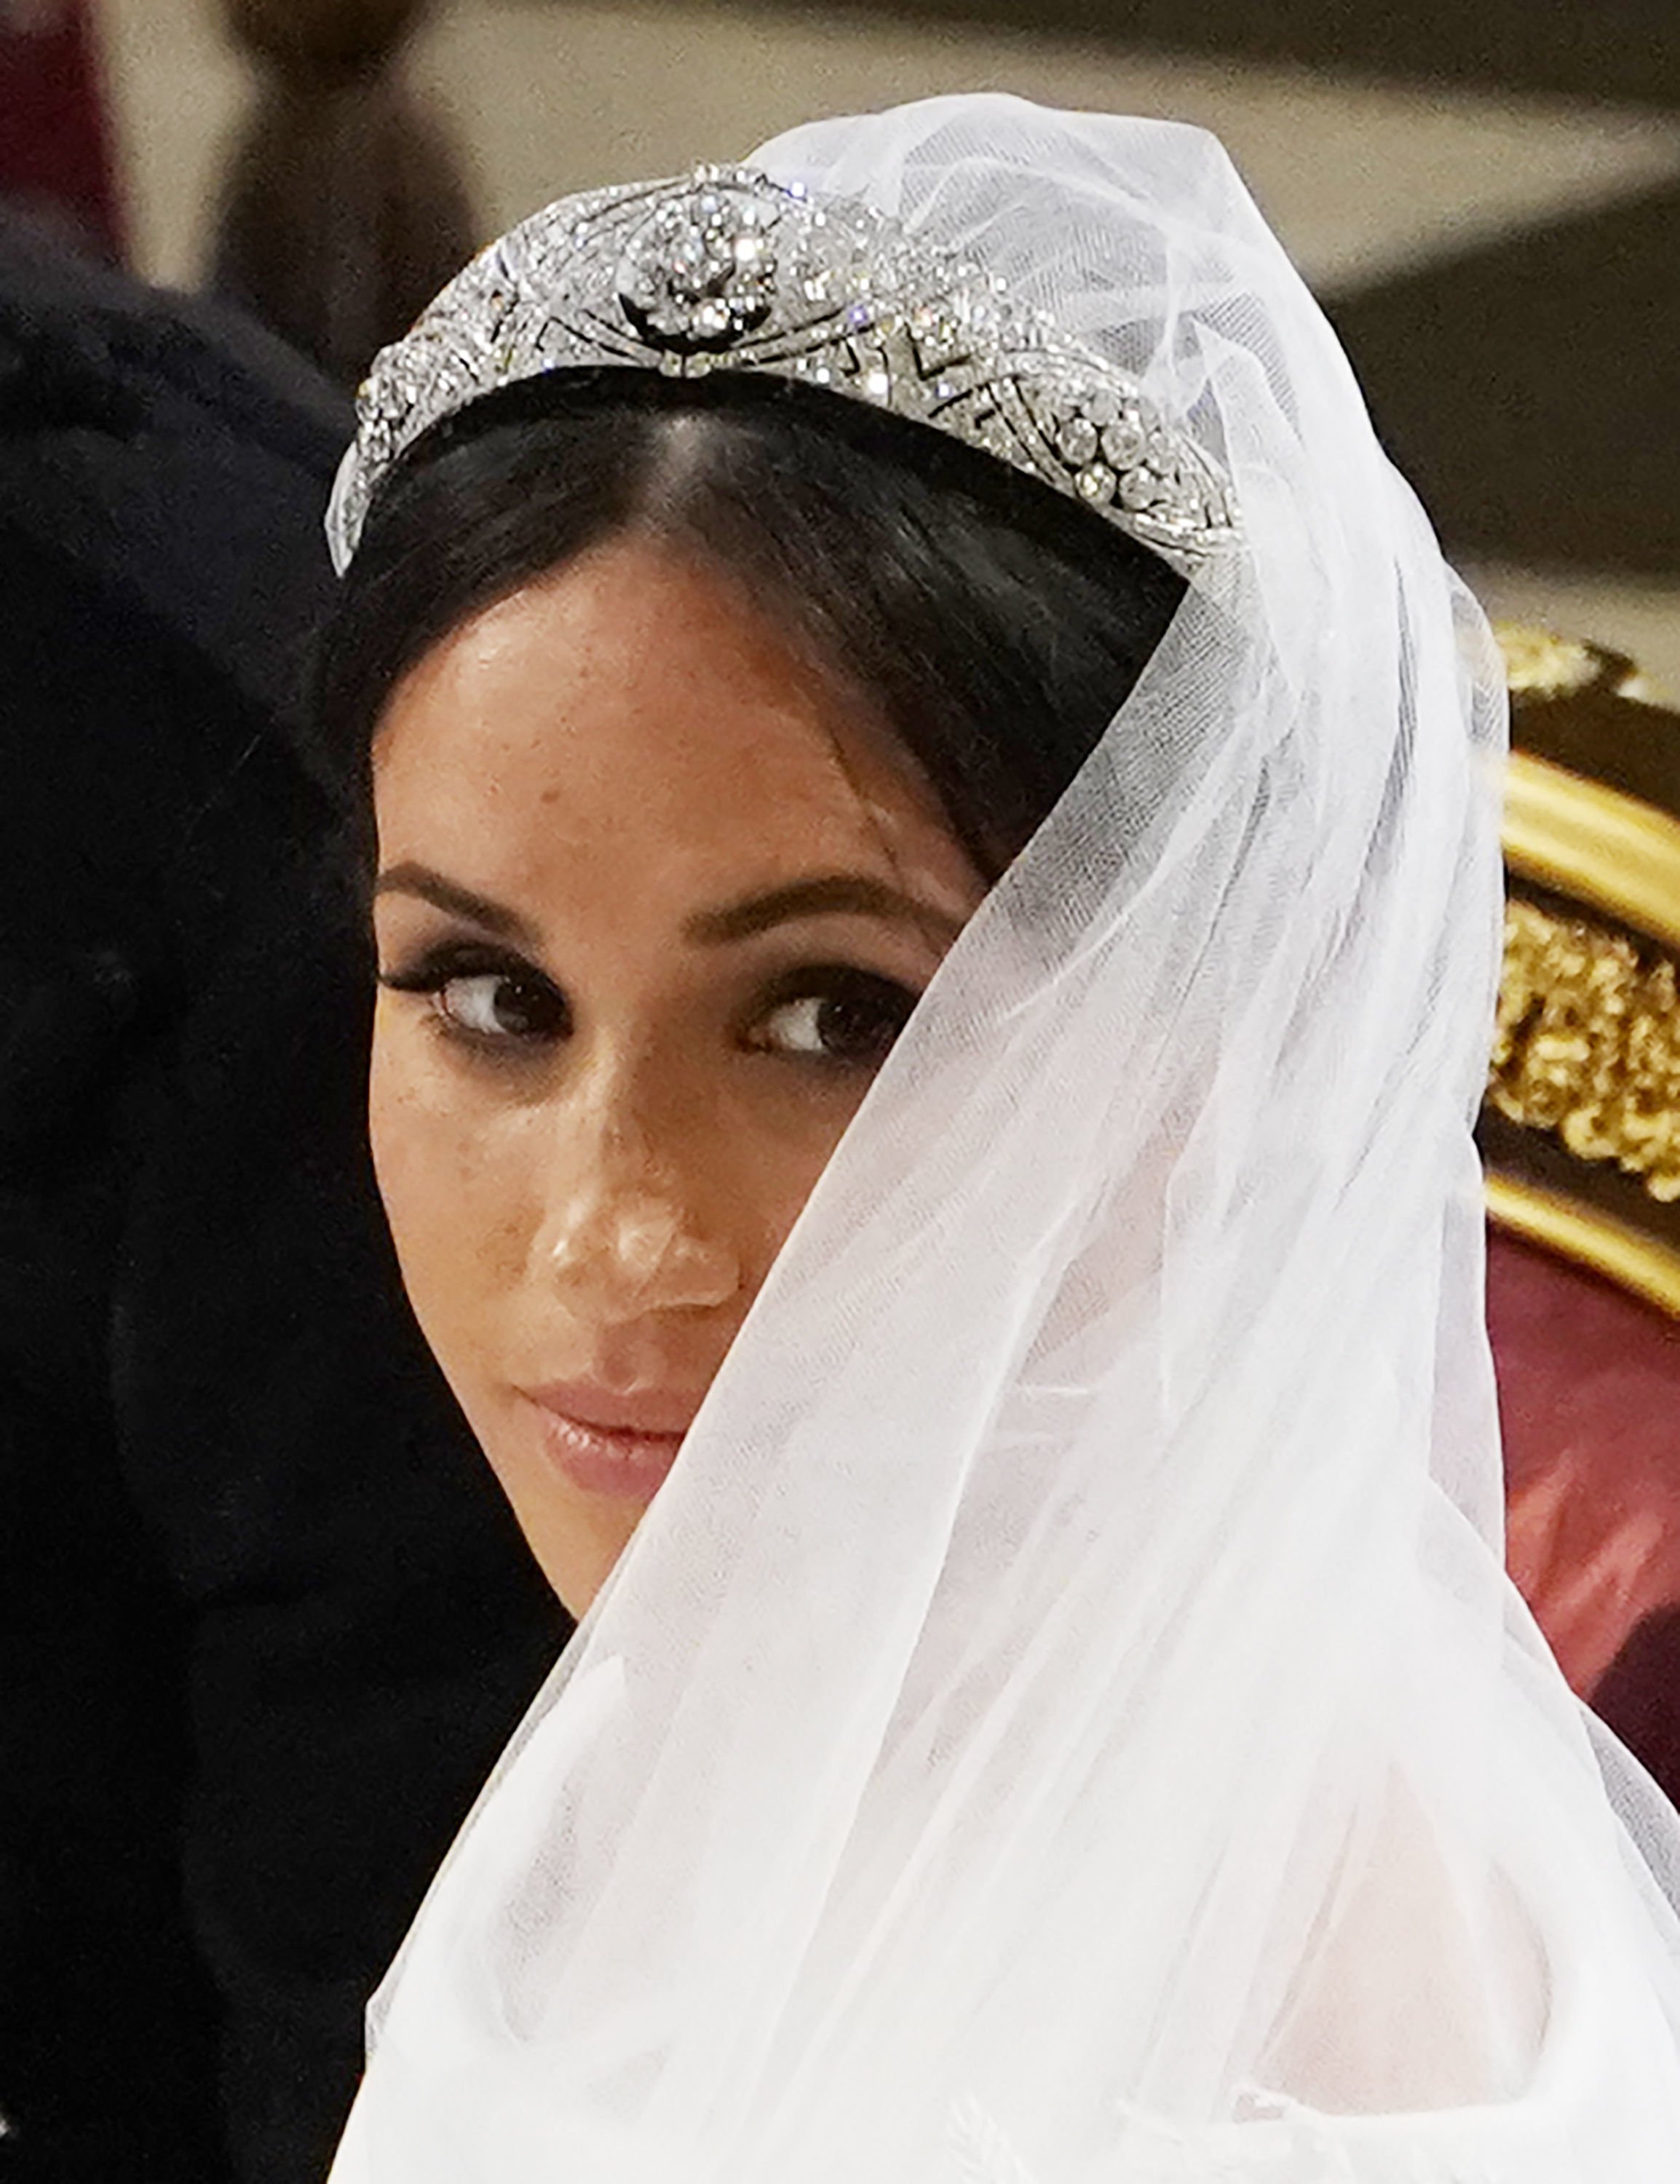 Meghan Markle at the altar at St George's Chapel on May 19, 2018, in Windsor, England | Source: Getty Images